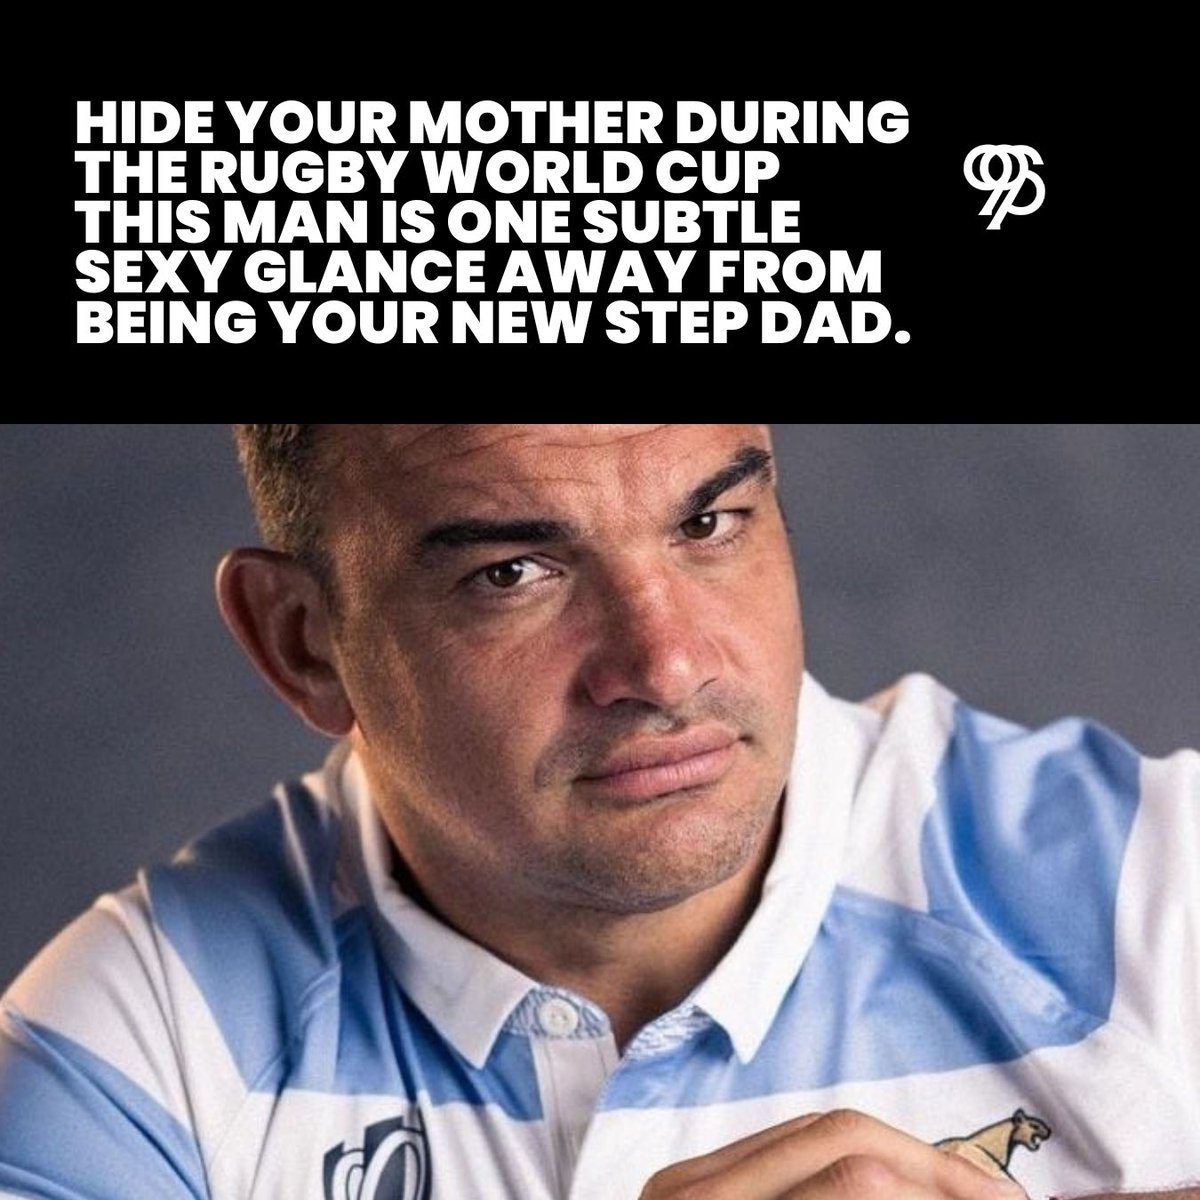 He’s your new Daddy. #RugbyWorldCup #KeepRugbySocial